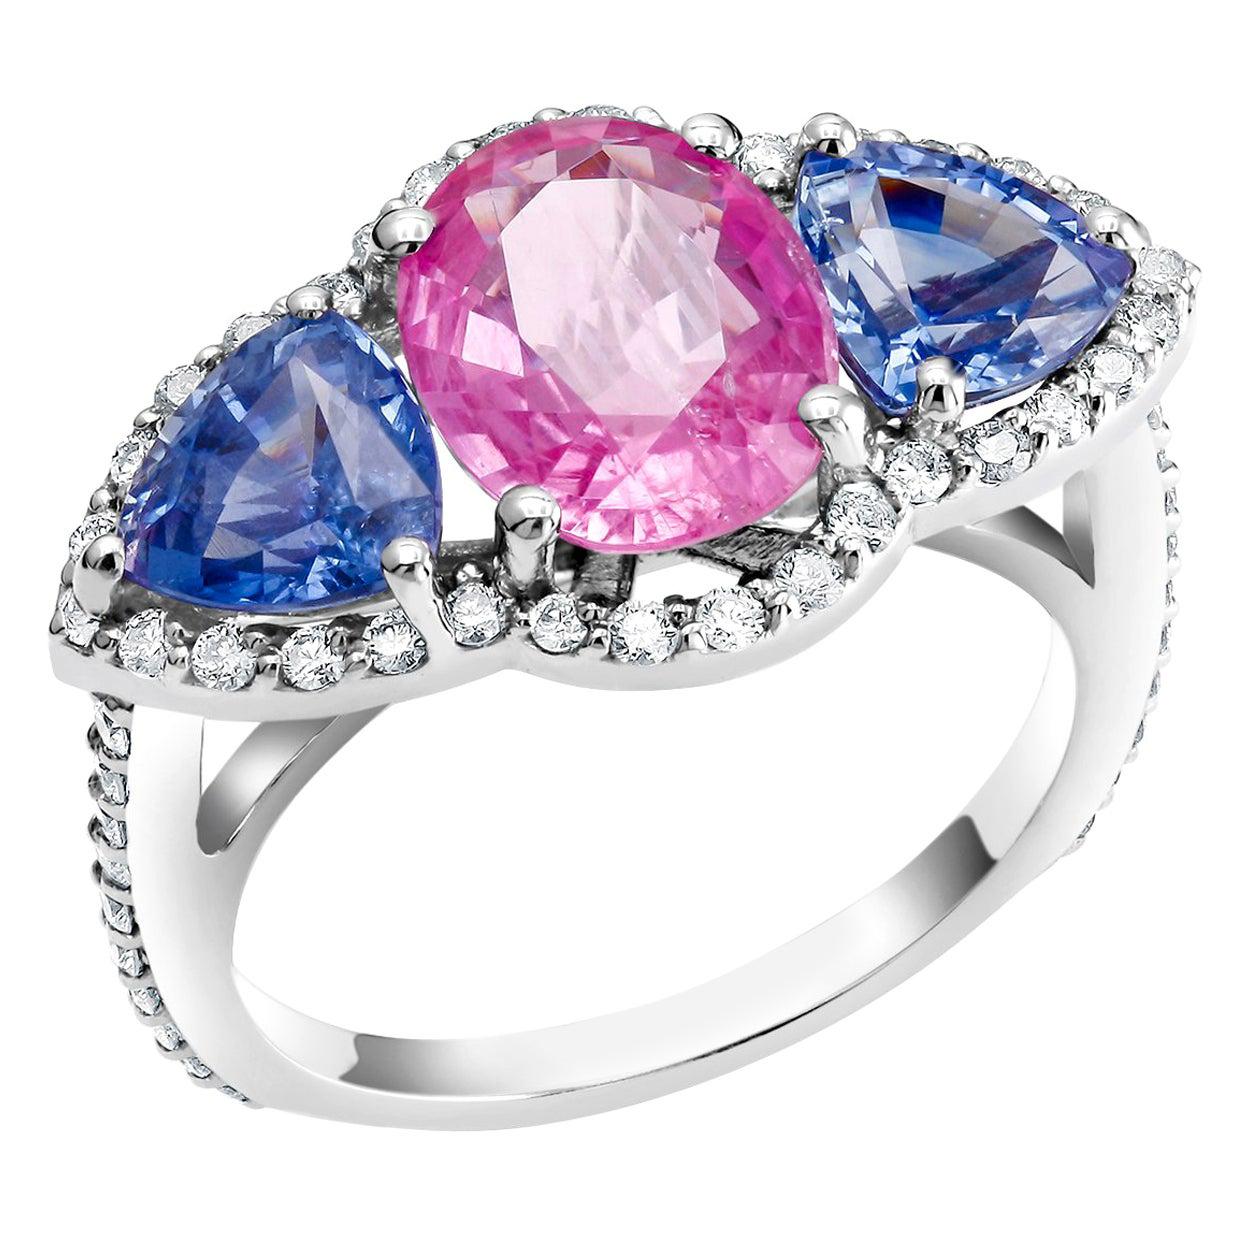 One of a kind eighteen karats white gold cocktail ring
Fucsia Ceylon pink cushion-shaped sapphire weighing 2.98 carats 
Matched pair of trillion Ceylon cornflower blue Sapphire weighing 2.32 
Surrounded by pave set diamonds weighing 0.75 carats 